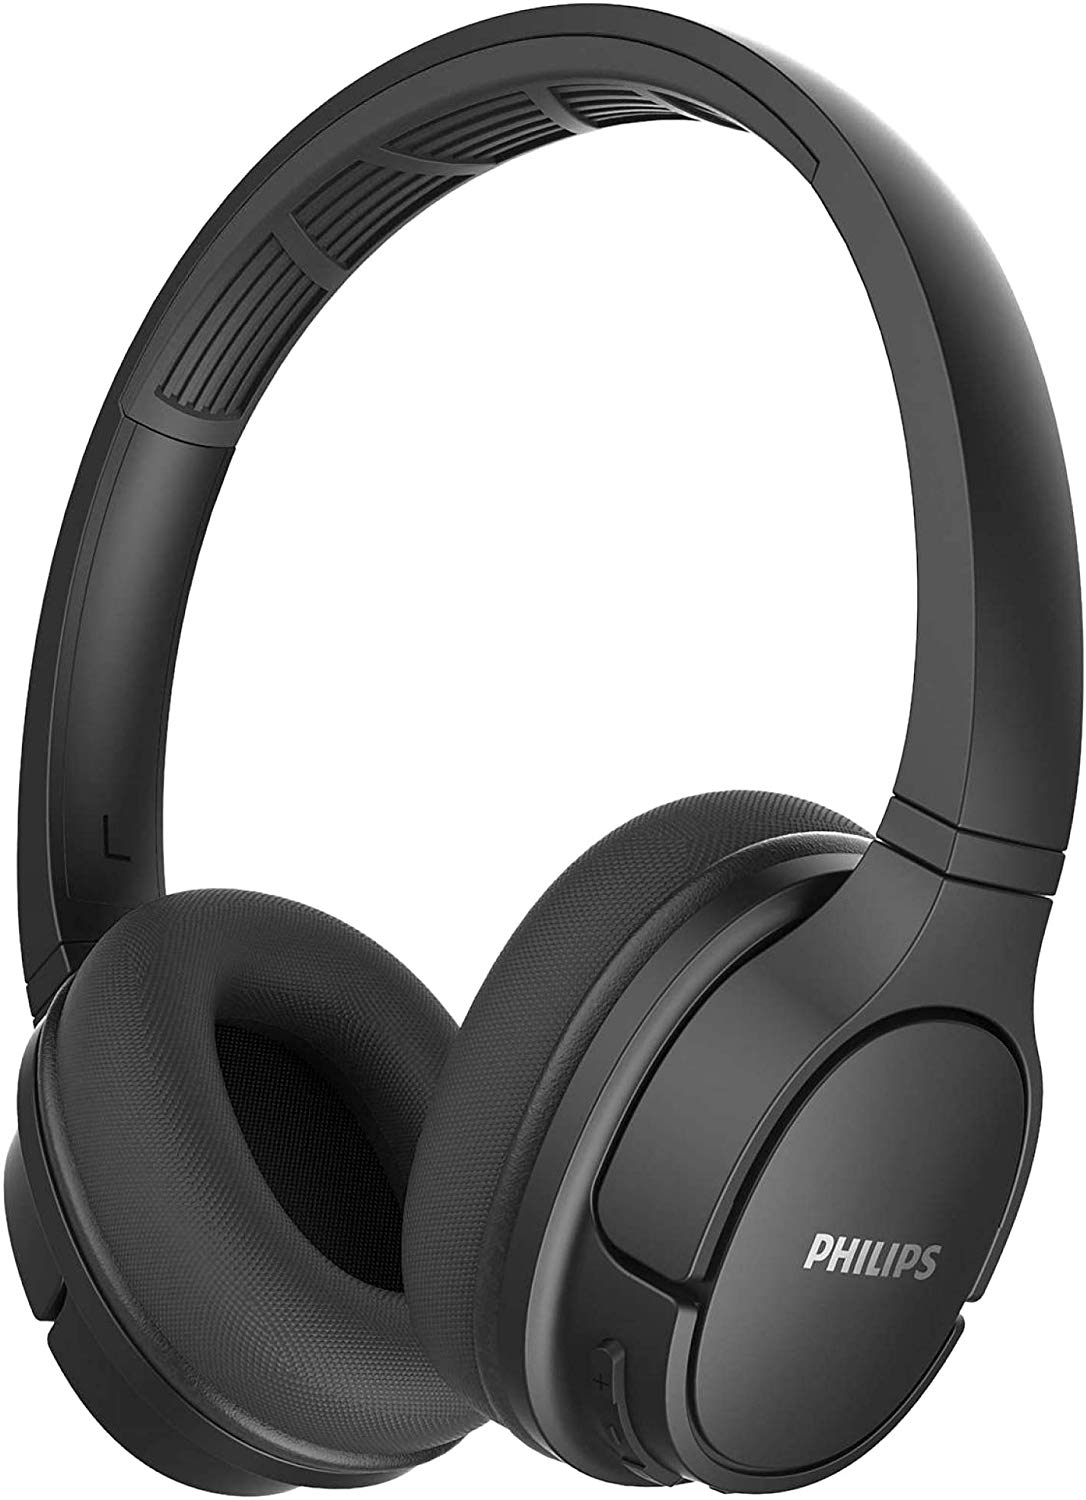 Top 8 Best Philips Bluetooth Headphones in 2022 - Reviews and Comparison